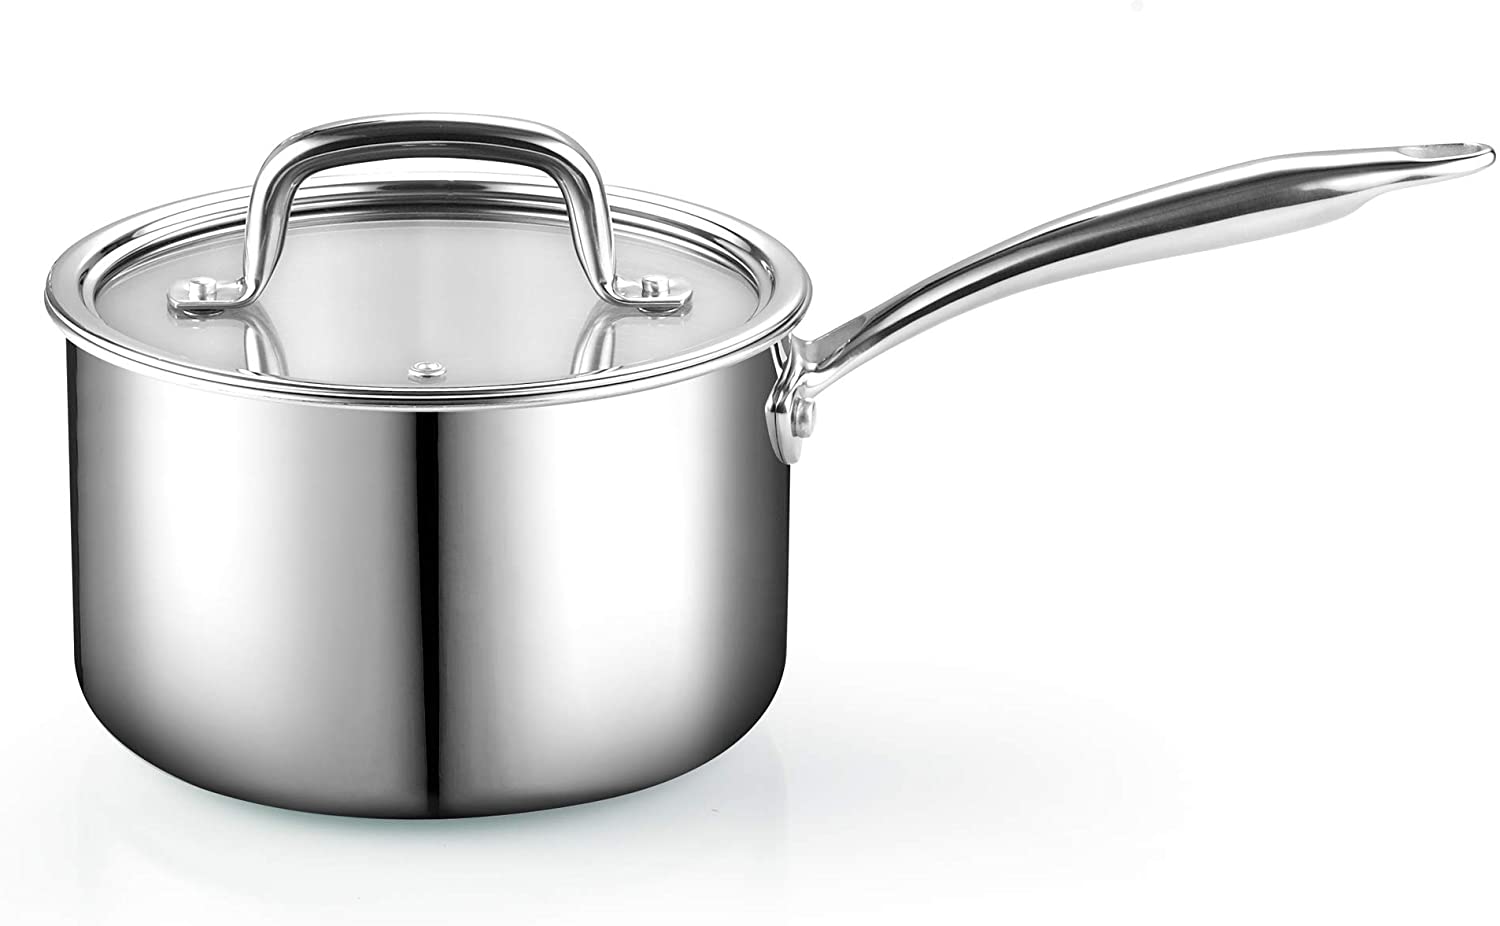 Cook N Home Stainless Steel Saucepan 1.5 Quart, Tri-Ply Full Clad Sauce Pan  with Glass Lid, Silver